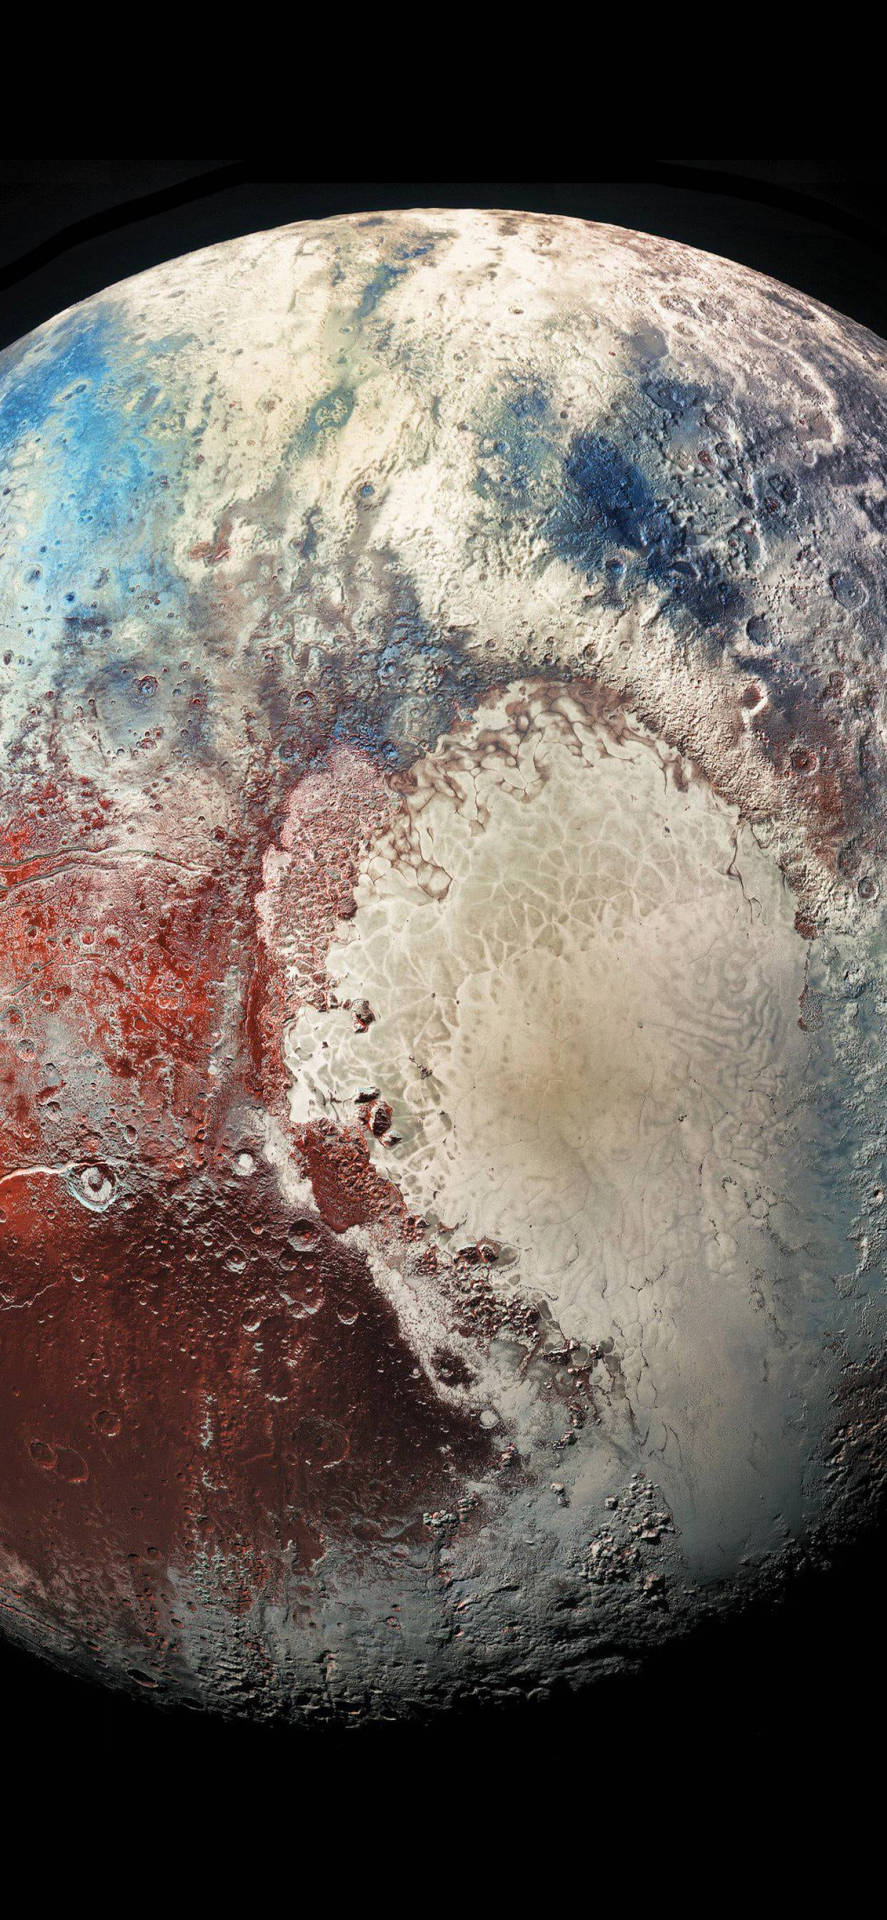 pluto's surface is shown in this image Wallpaper